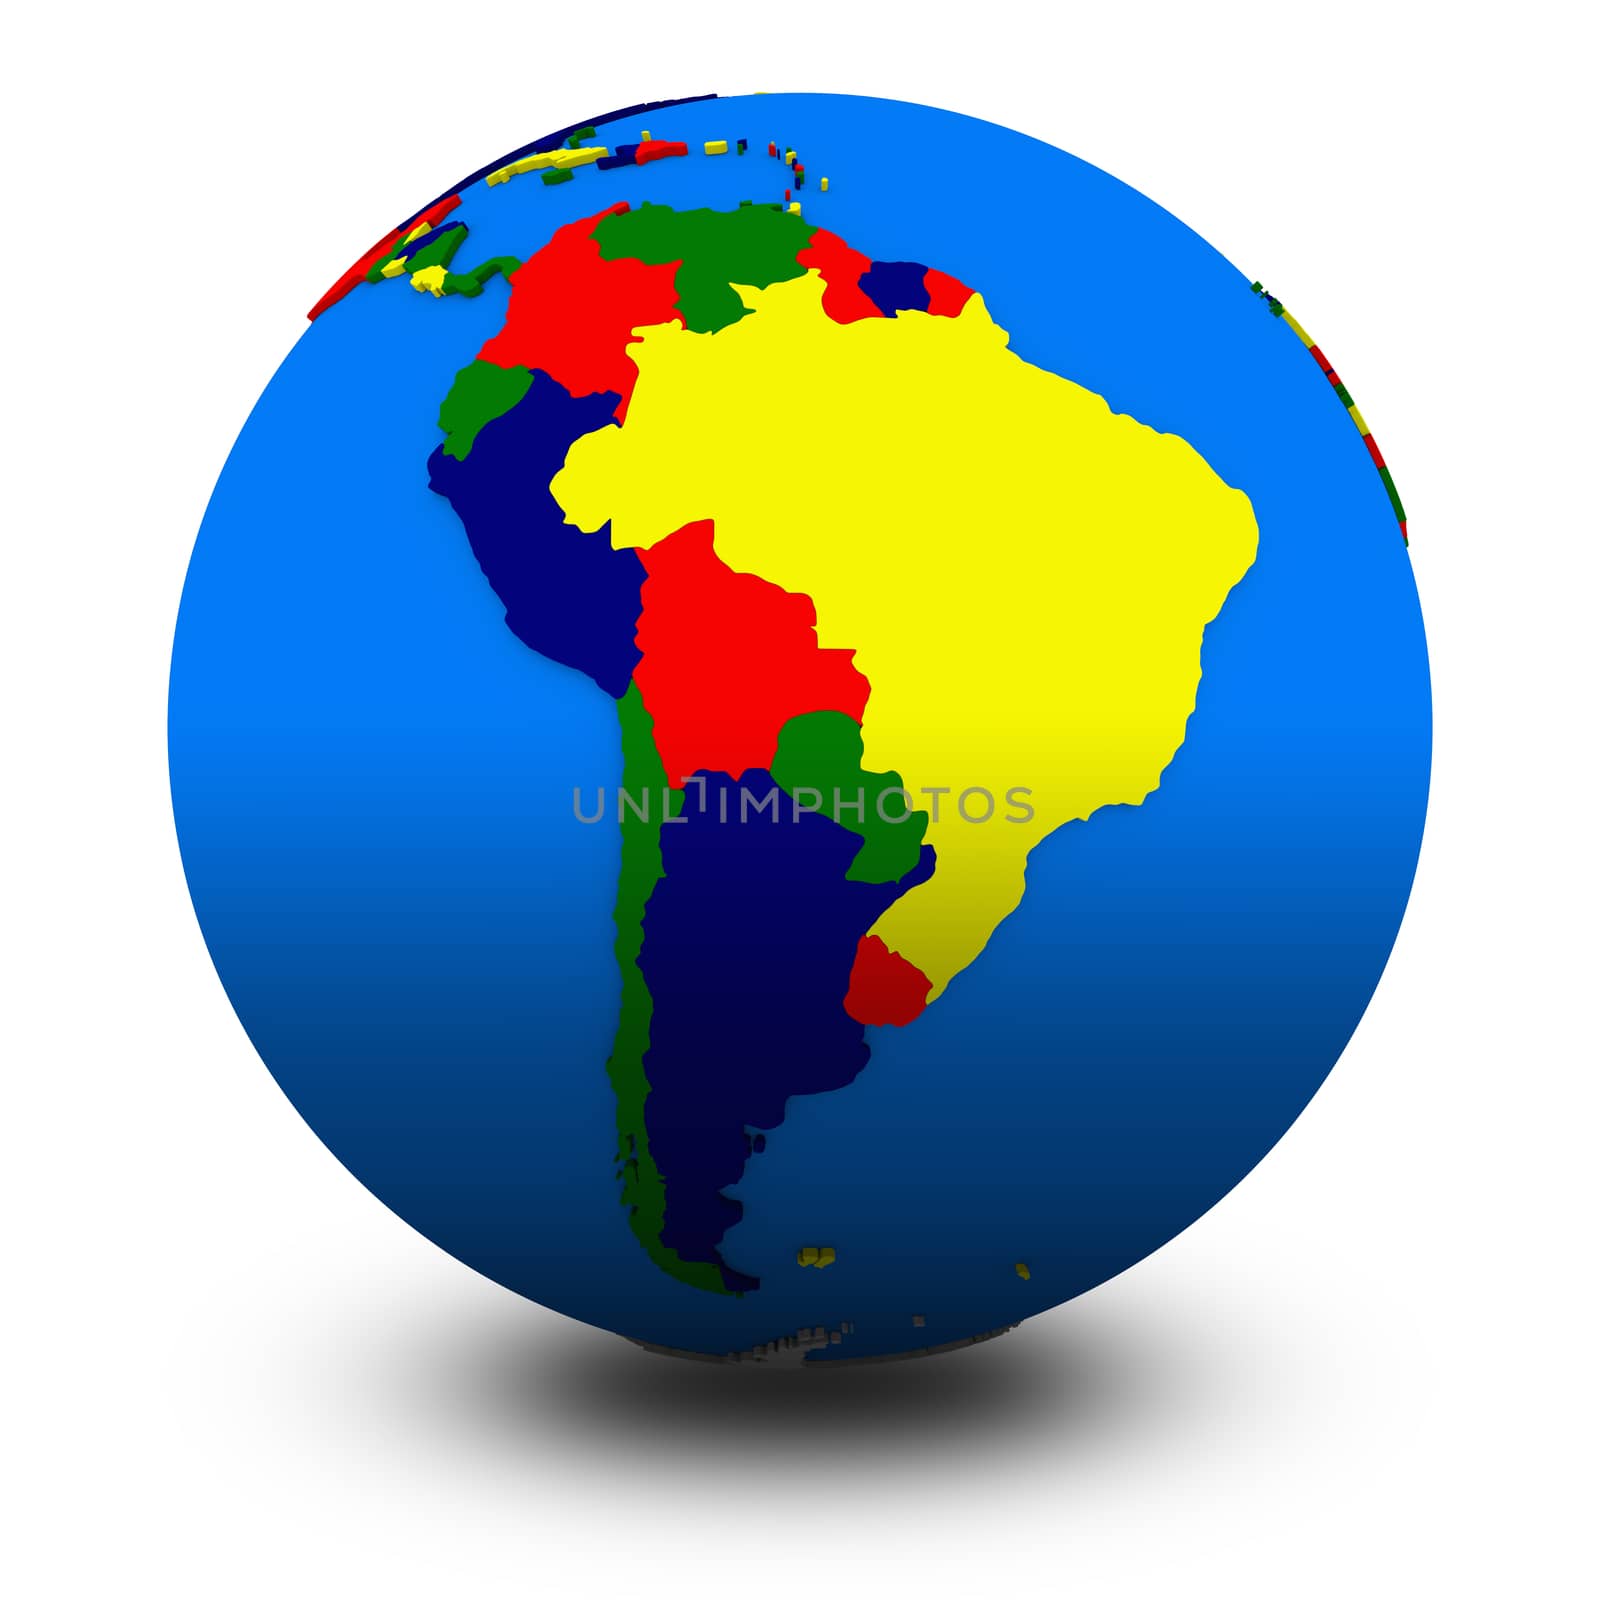 south America on political globe, illustration isolated on white background with shadow